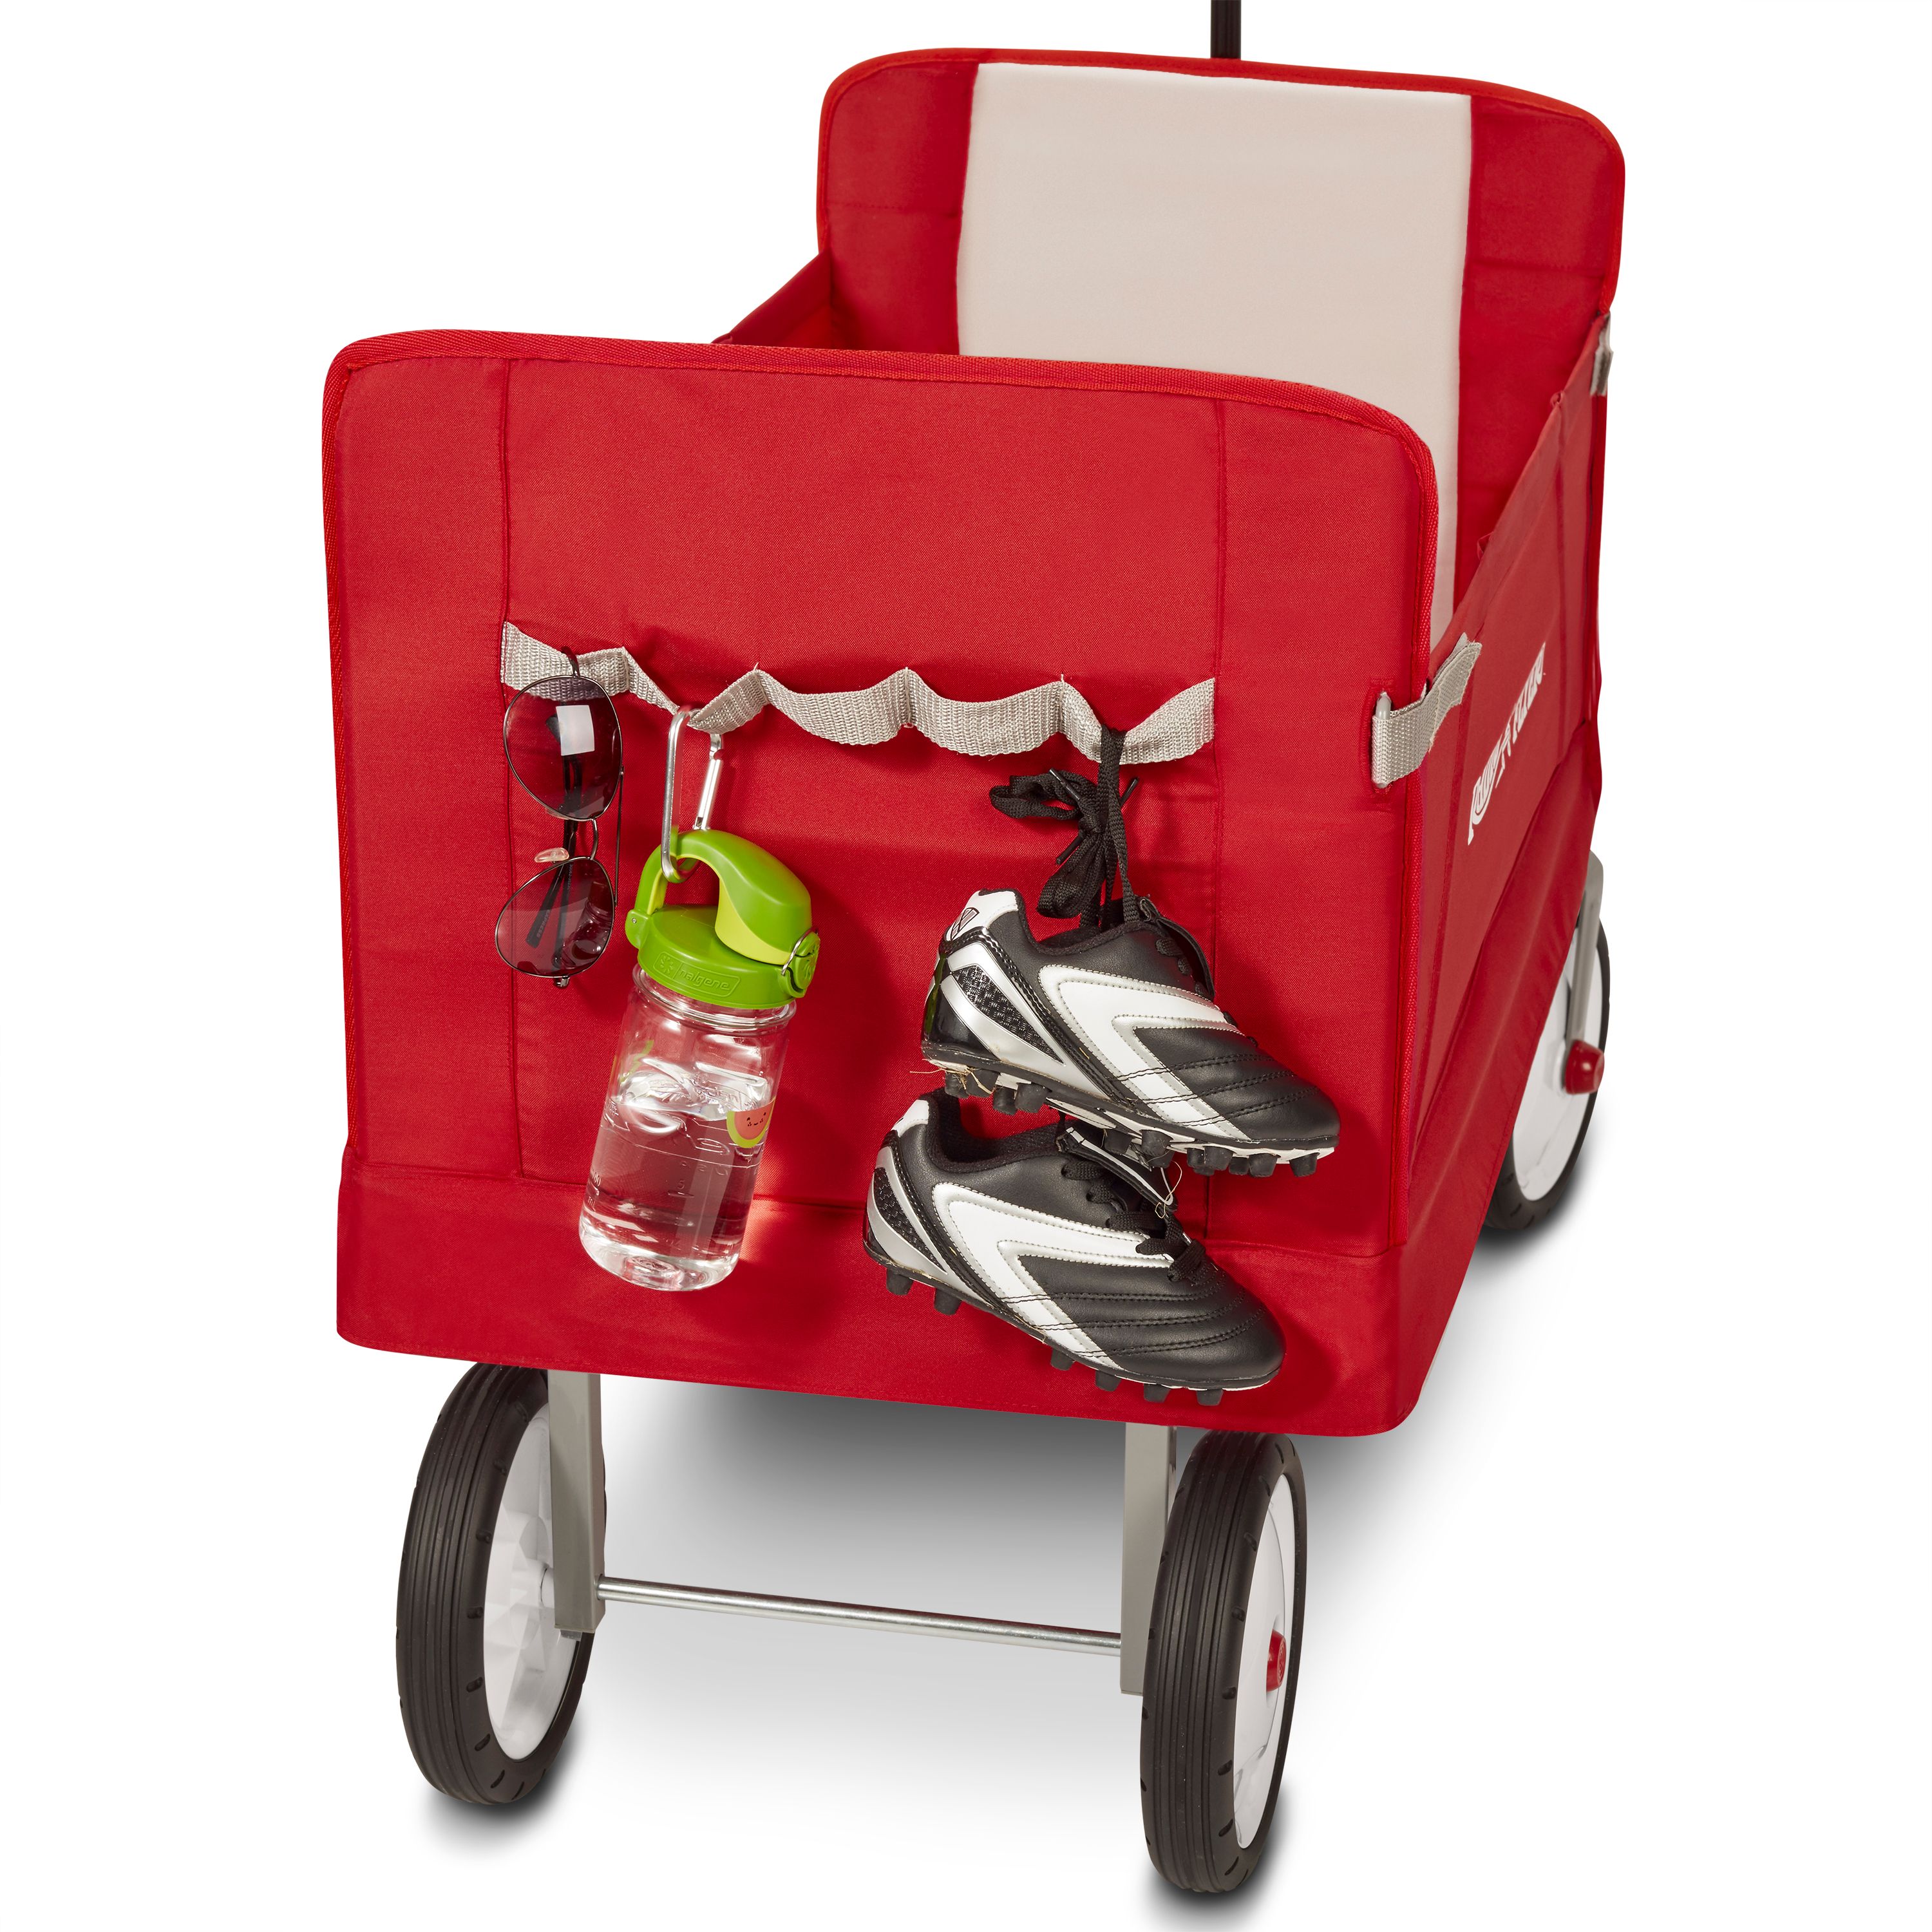 Radio Flyer, 3-in-1 EZ Fold Wagon, Padded Seat with Seat Belts, Red - image 4 of 16